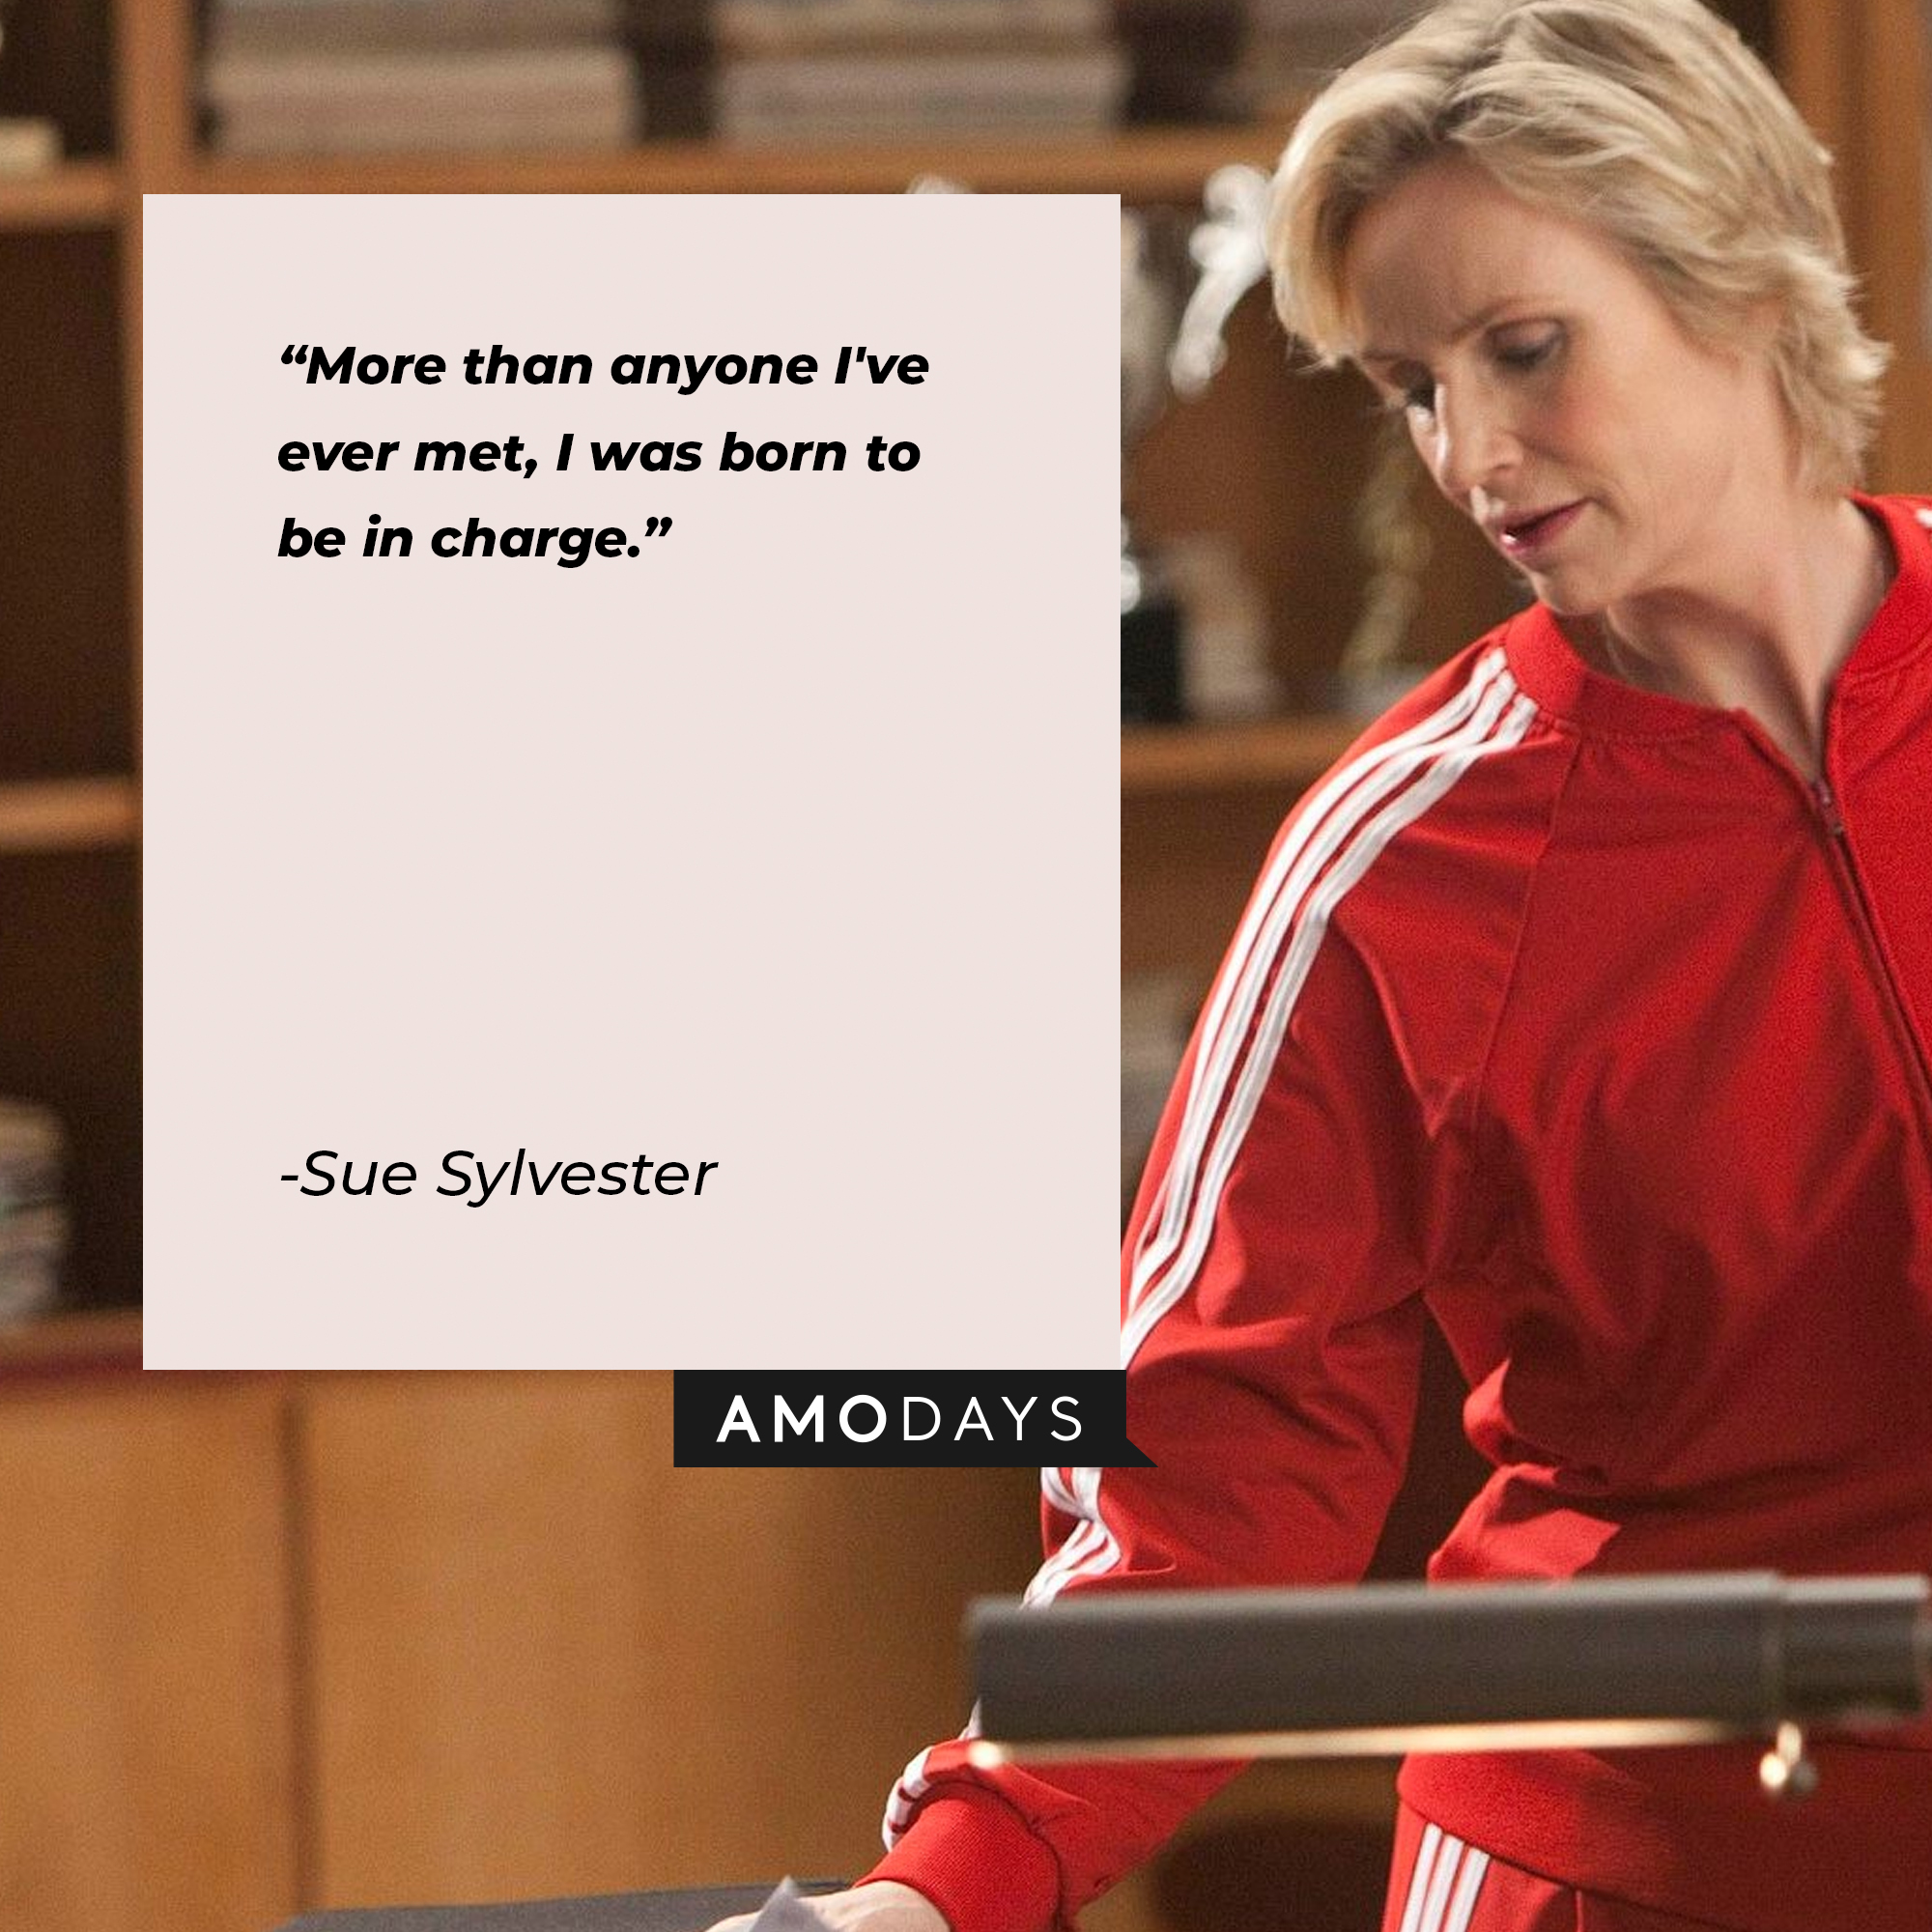 A picture of Sue Sylester with a quote by her : “More than anyone I've ever met, I was born to be in charge.” | Source: facebook.com/Glee